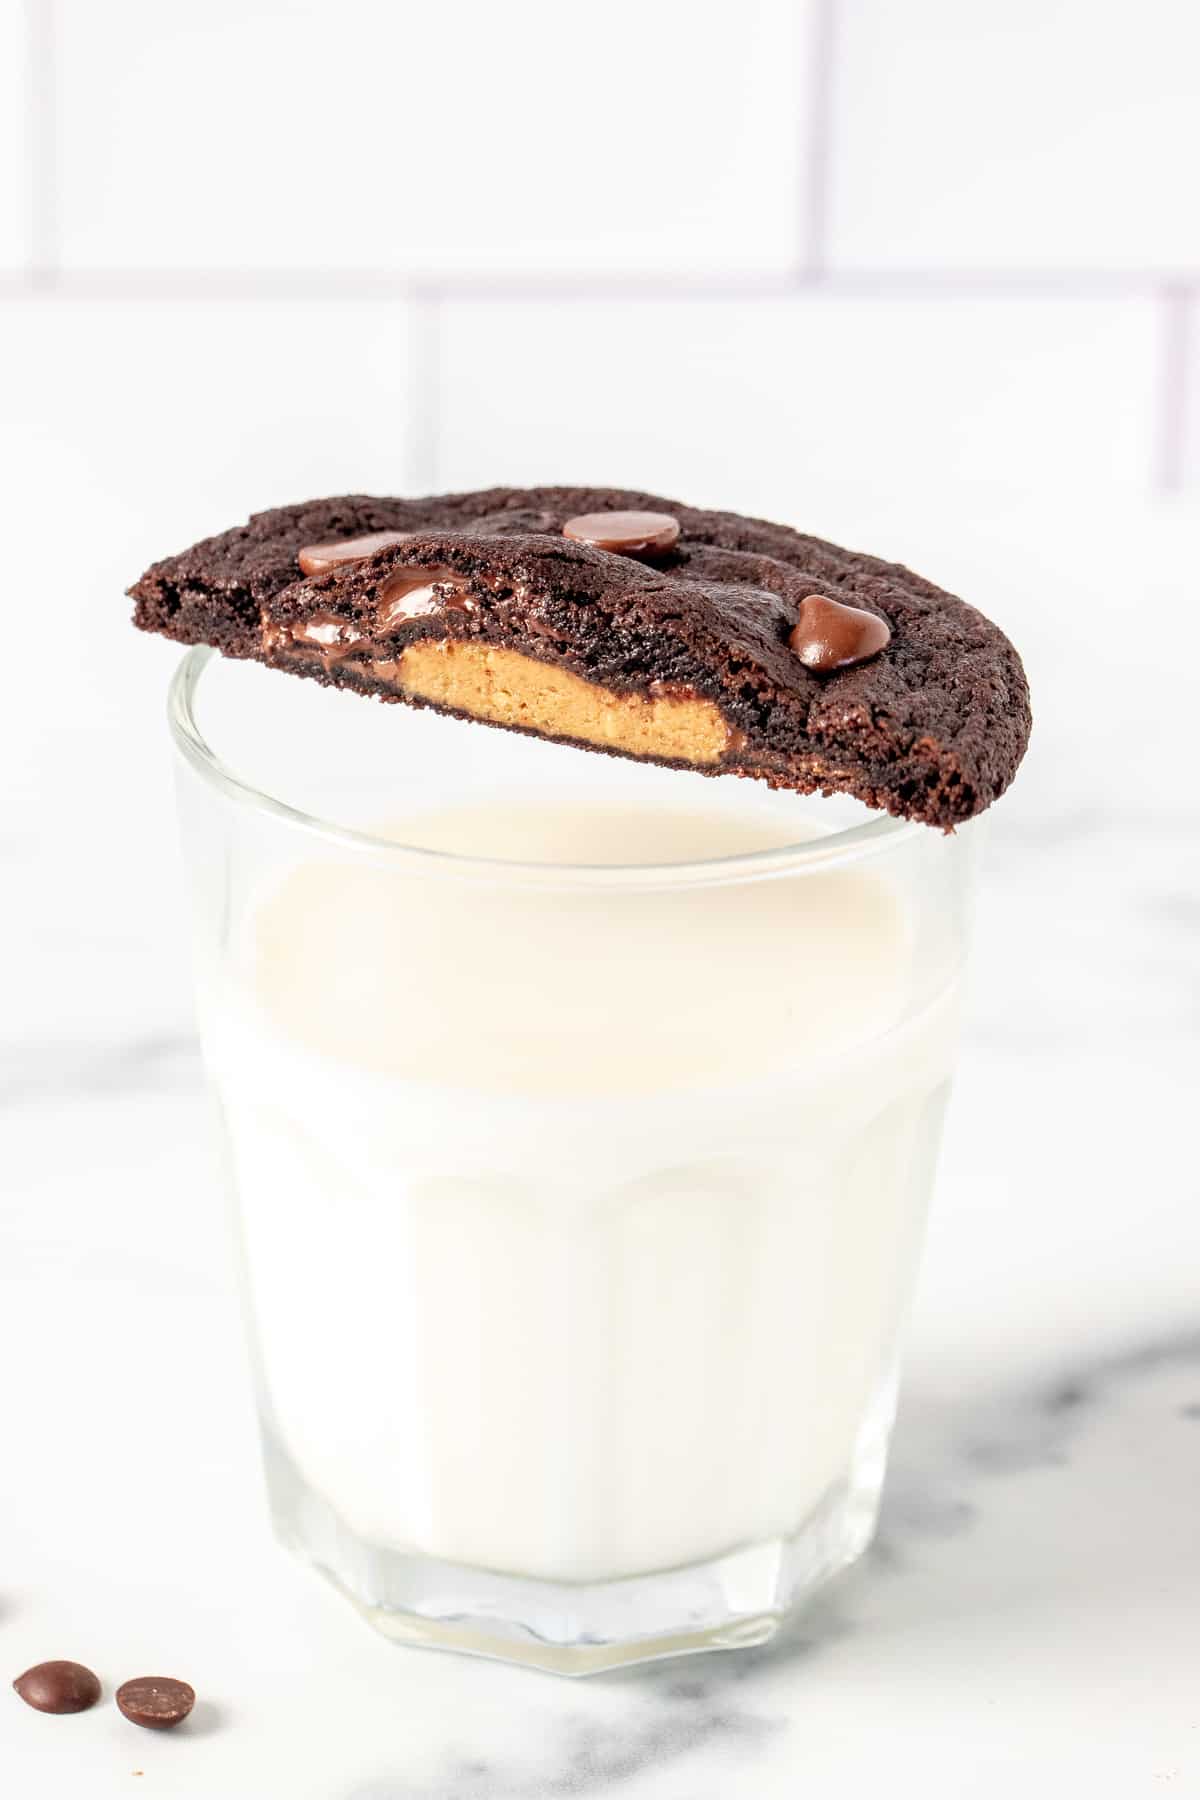 Glass of milk with half a peanut butter cup chocolate cookie on top